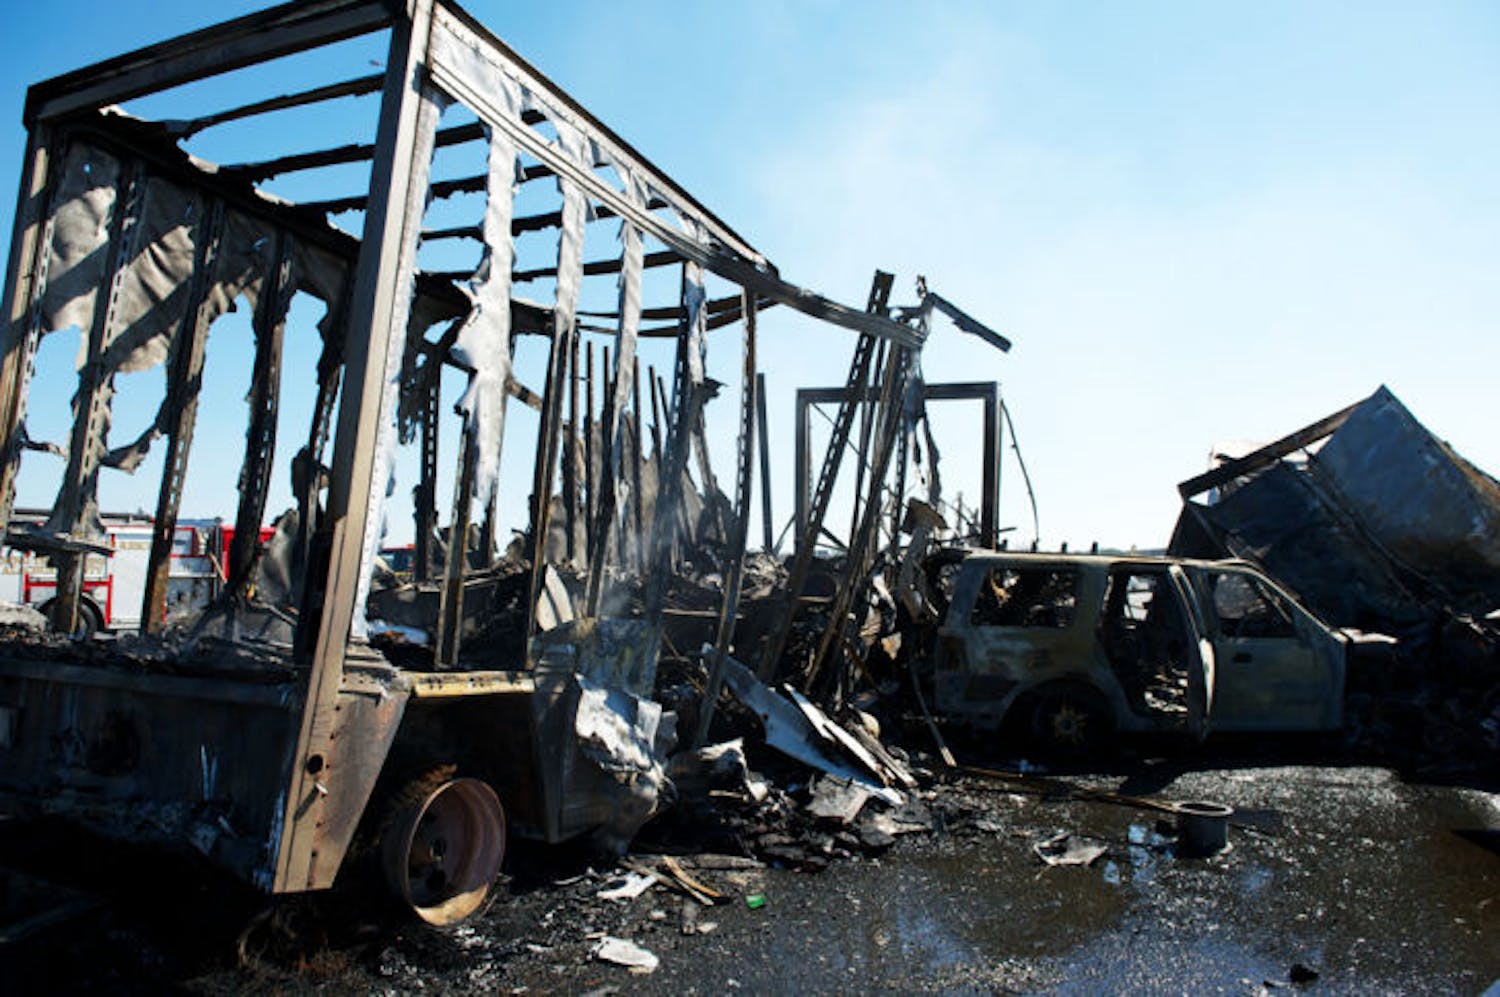 The charred wreckage of a semitrailer and an SUV sit on Interstate 75 in Paynes Prairie Preserve State Park on Jan. 29, 2012. Today marks the one-year anniversary of the accident that claimed the lives of 11.